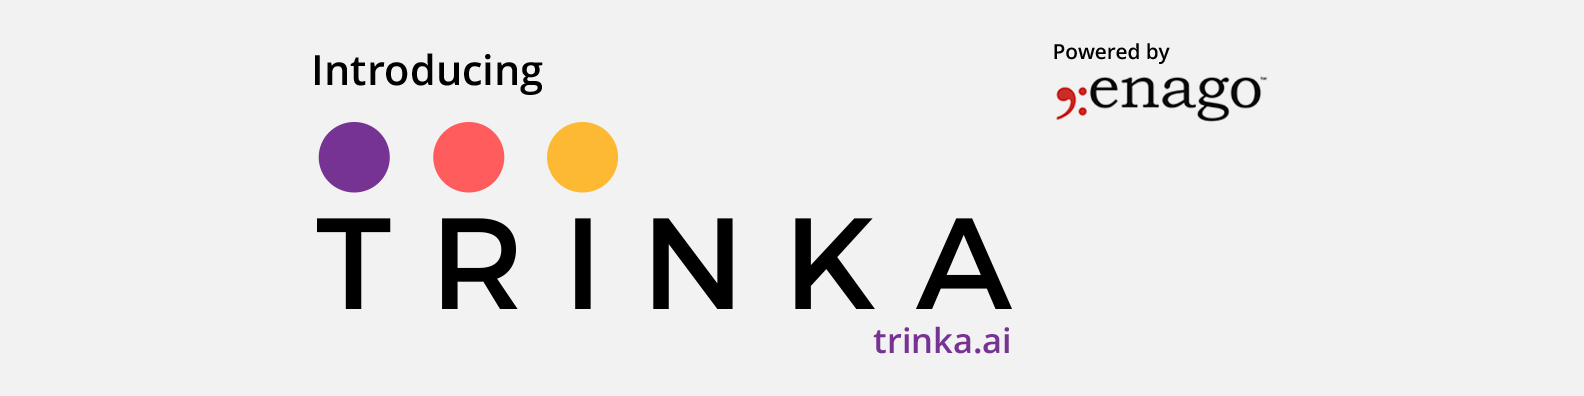 Trinka — World’s Premier Academic & Technical Writing Assistant is Here!